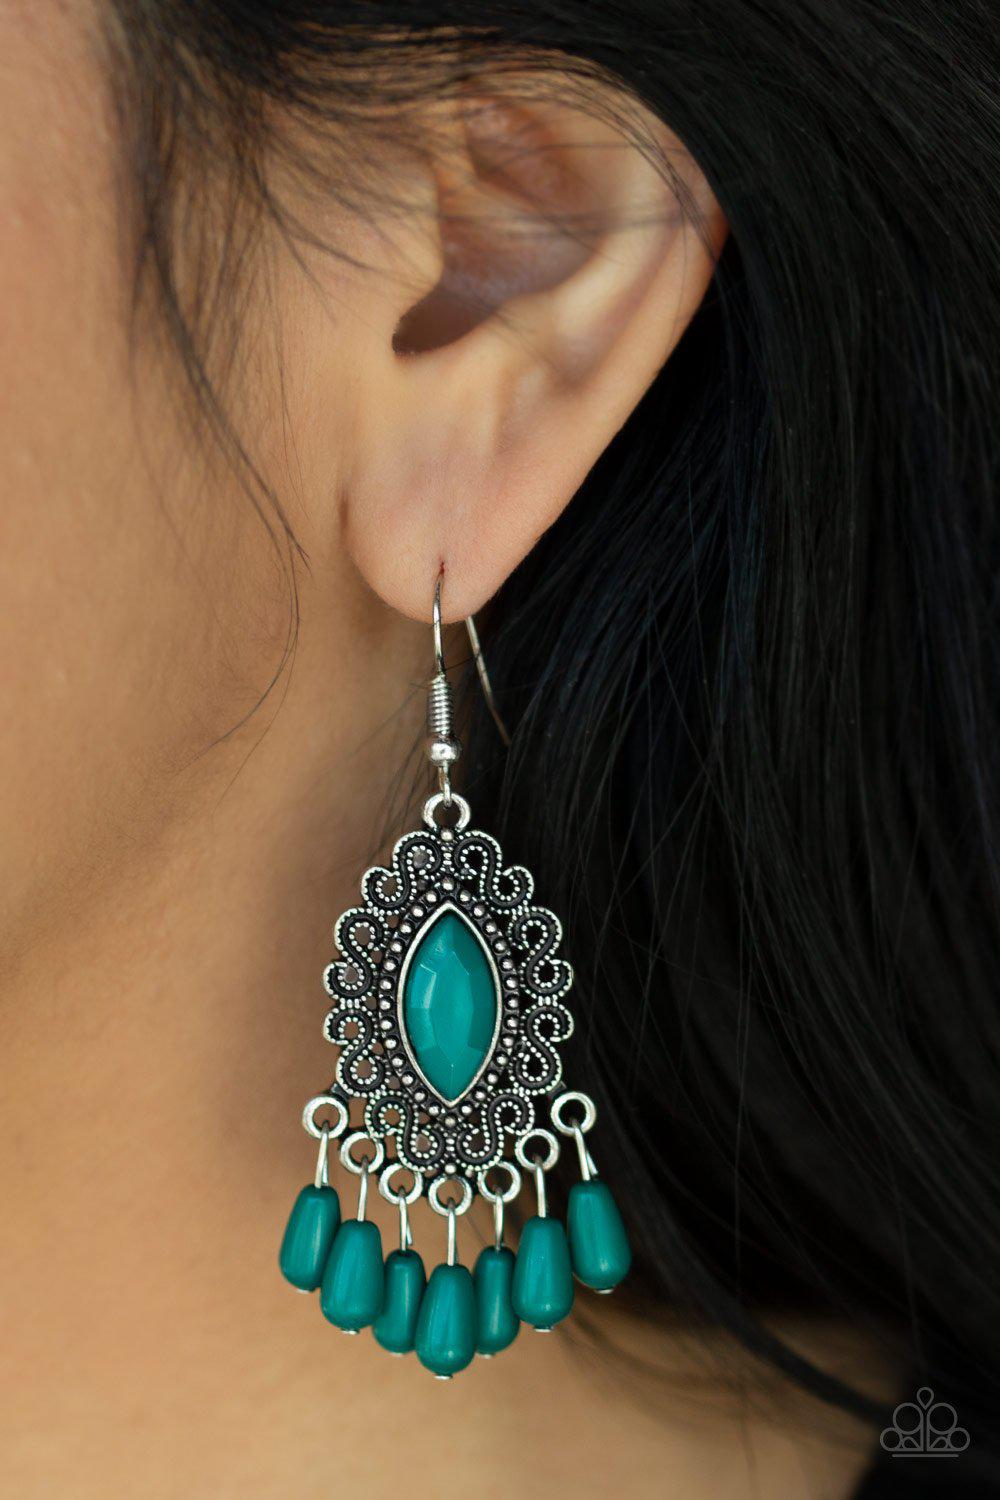 Private Villa Green and Silver Earrings - Paparazzi Accessories-CarasShop.com - $5 Jewelry by Cara Jewels